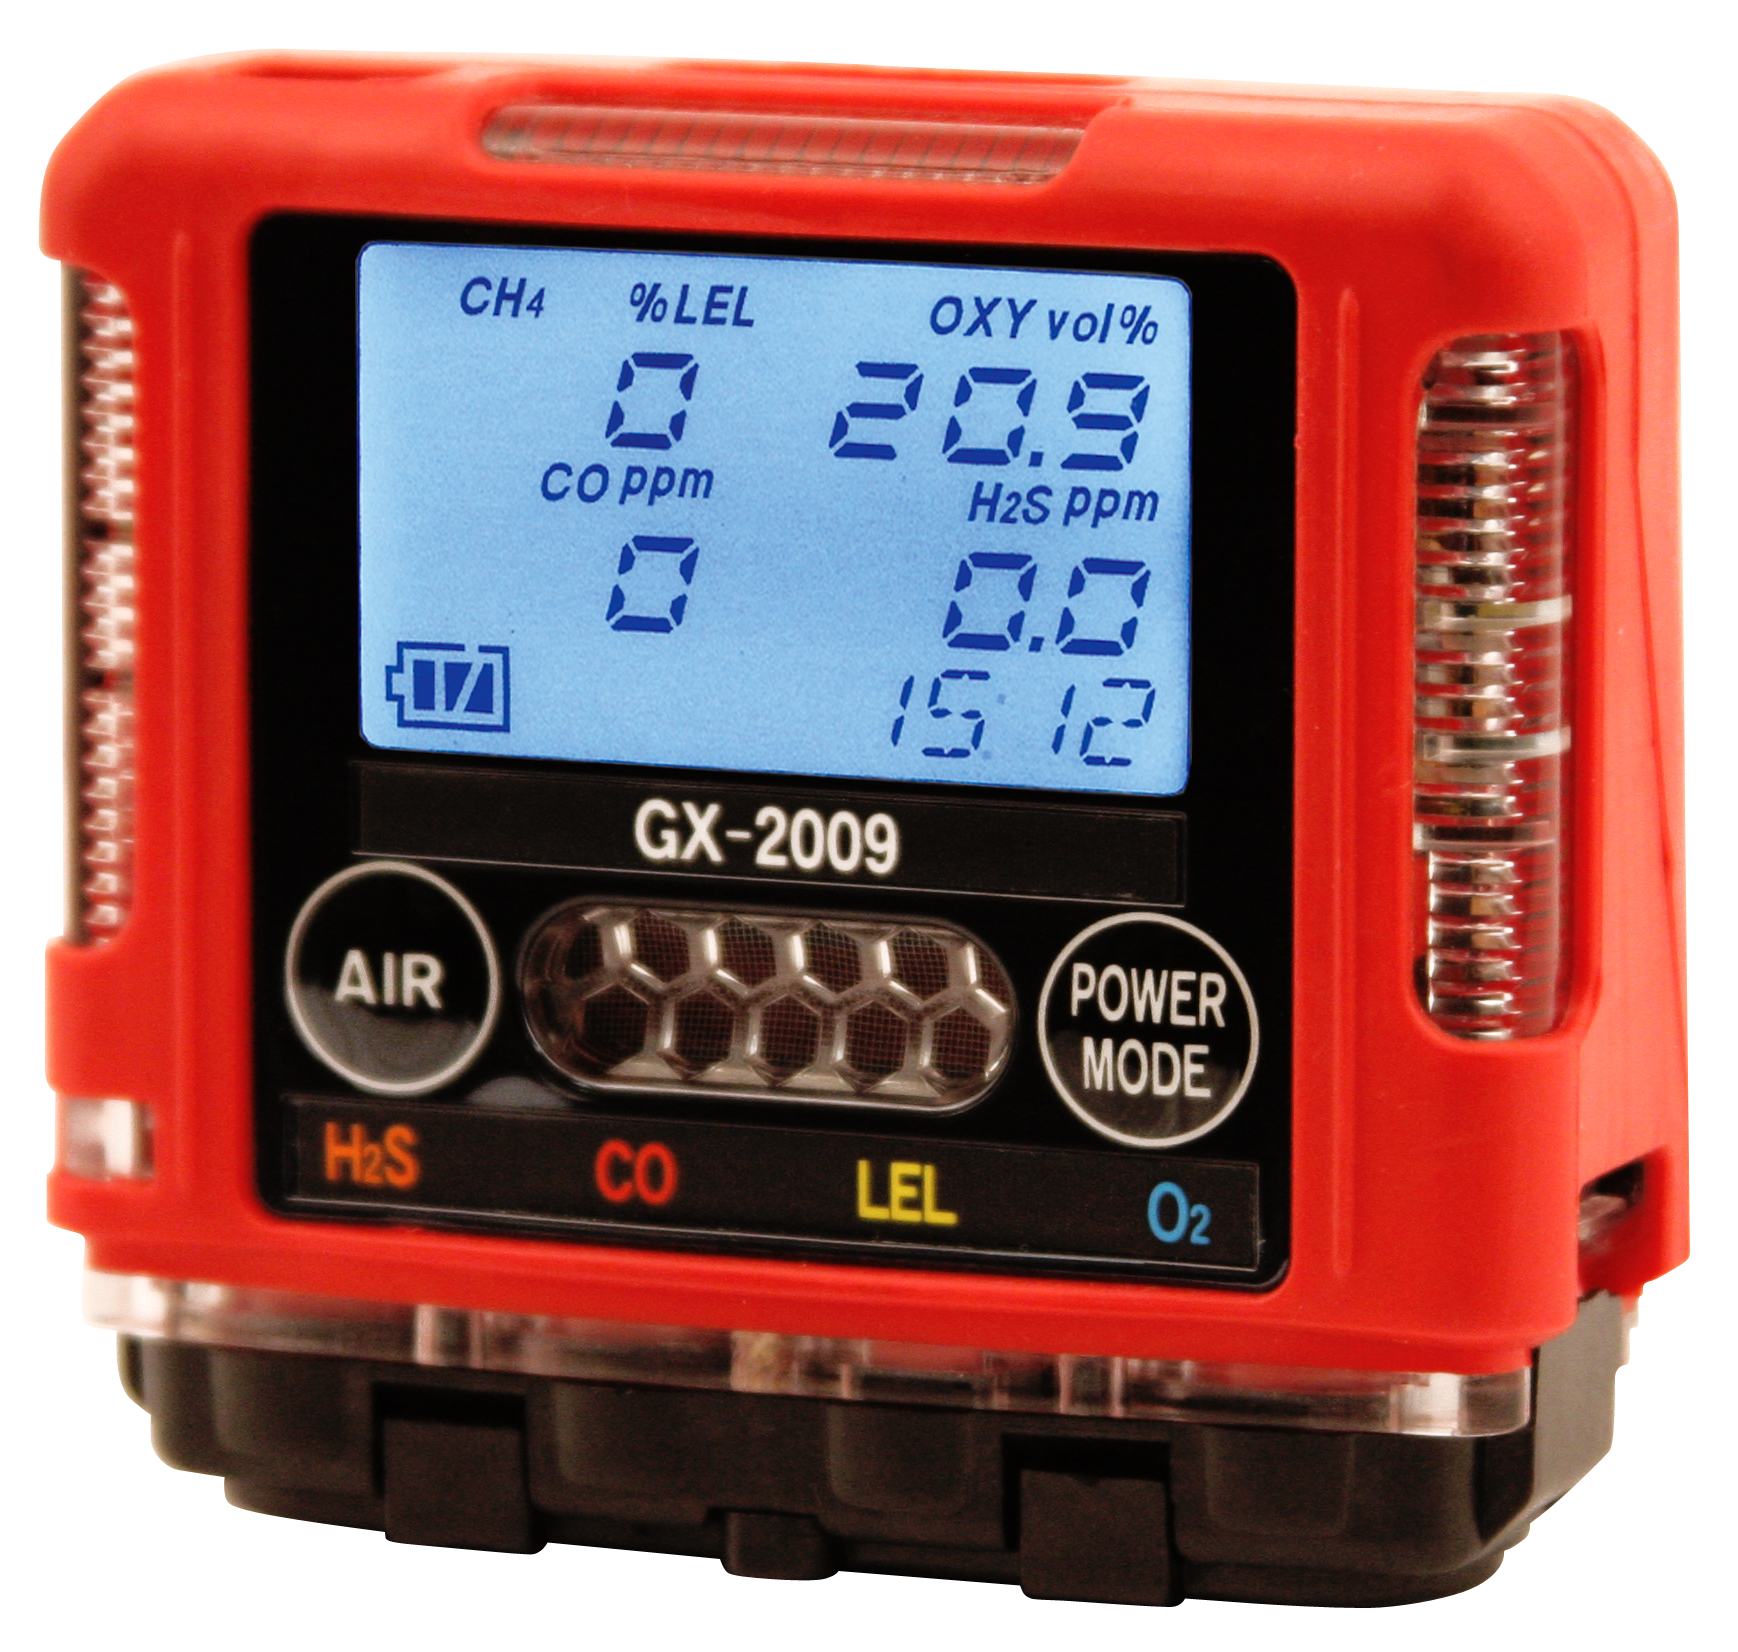 Product One - GX-2009 